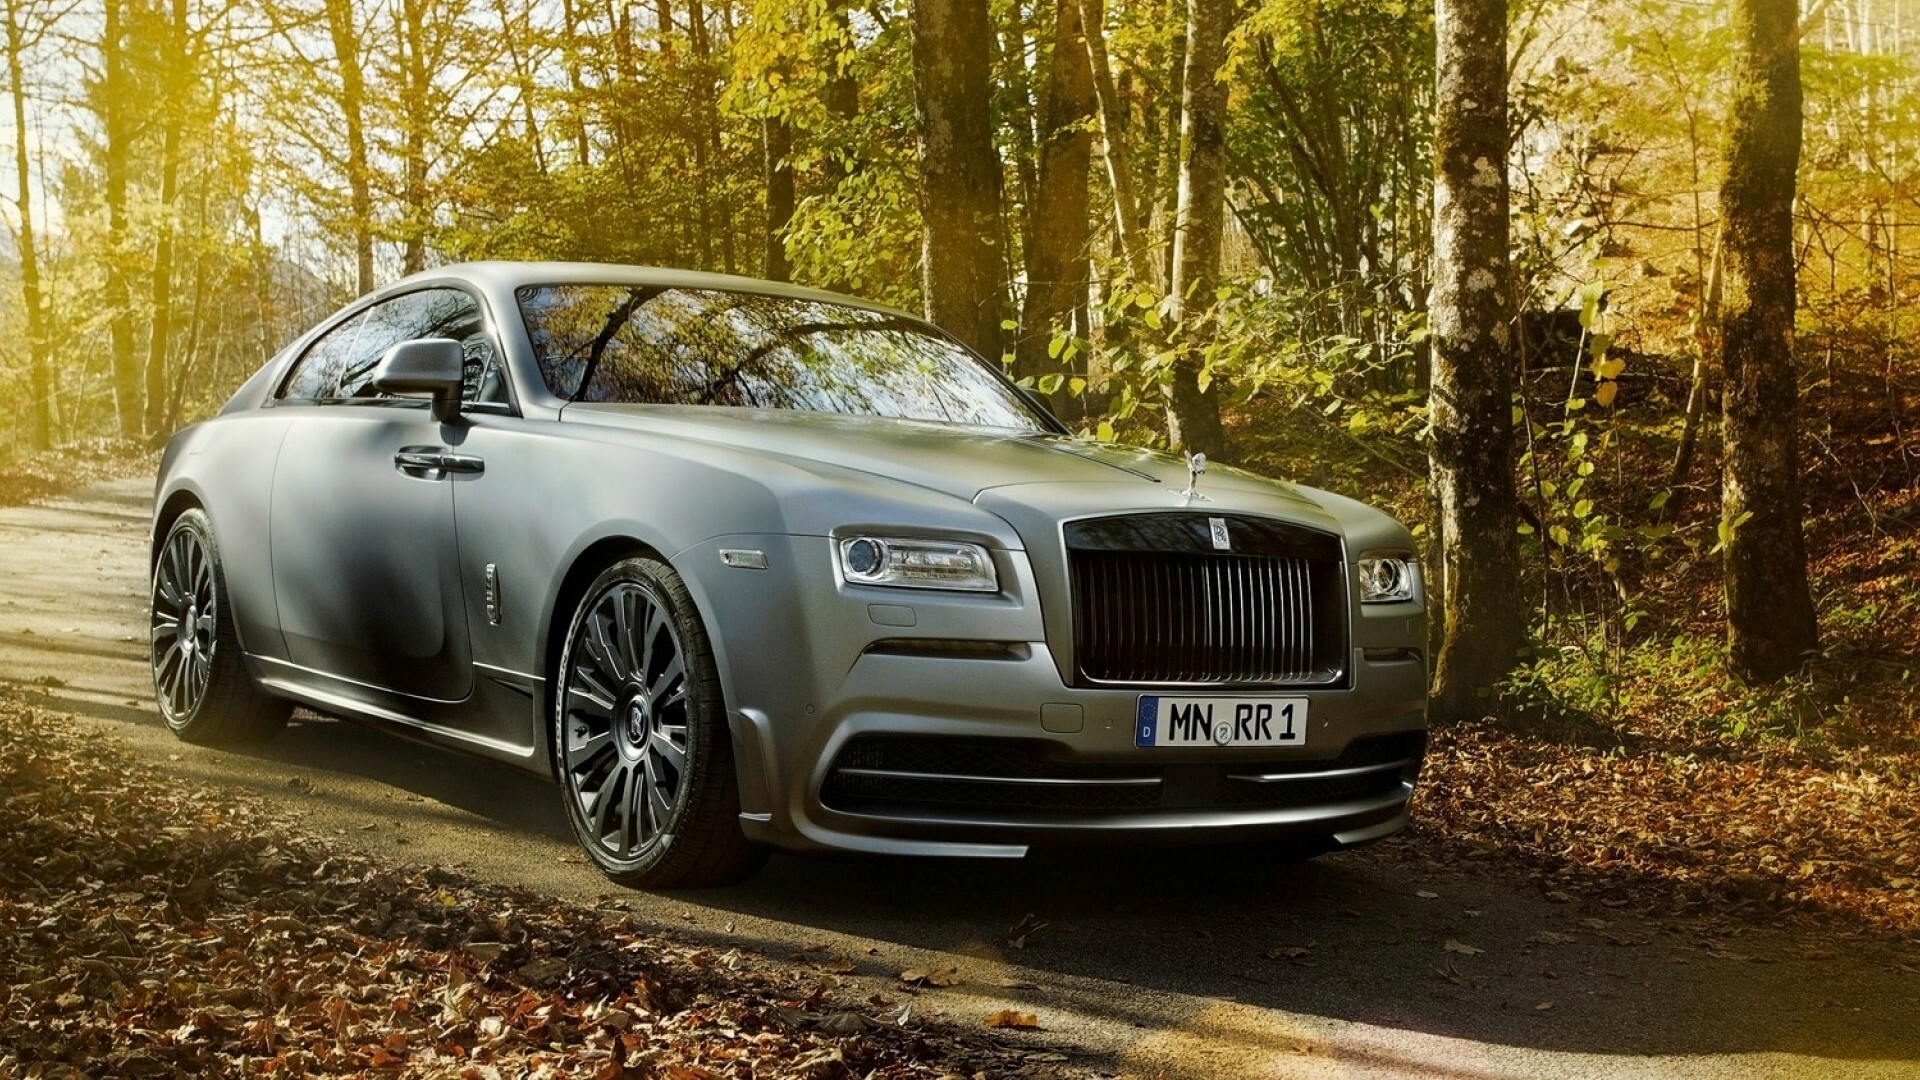 Rolls Royce Wraith wallpapers, Captivating beauty, Automotive mastery, Design perfection, 1920x1080 Full HD Desktop